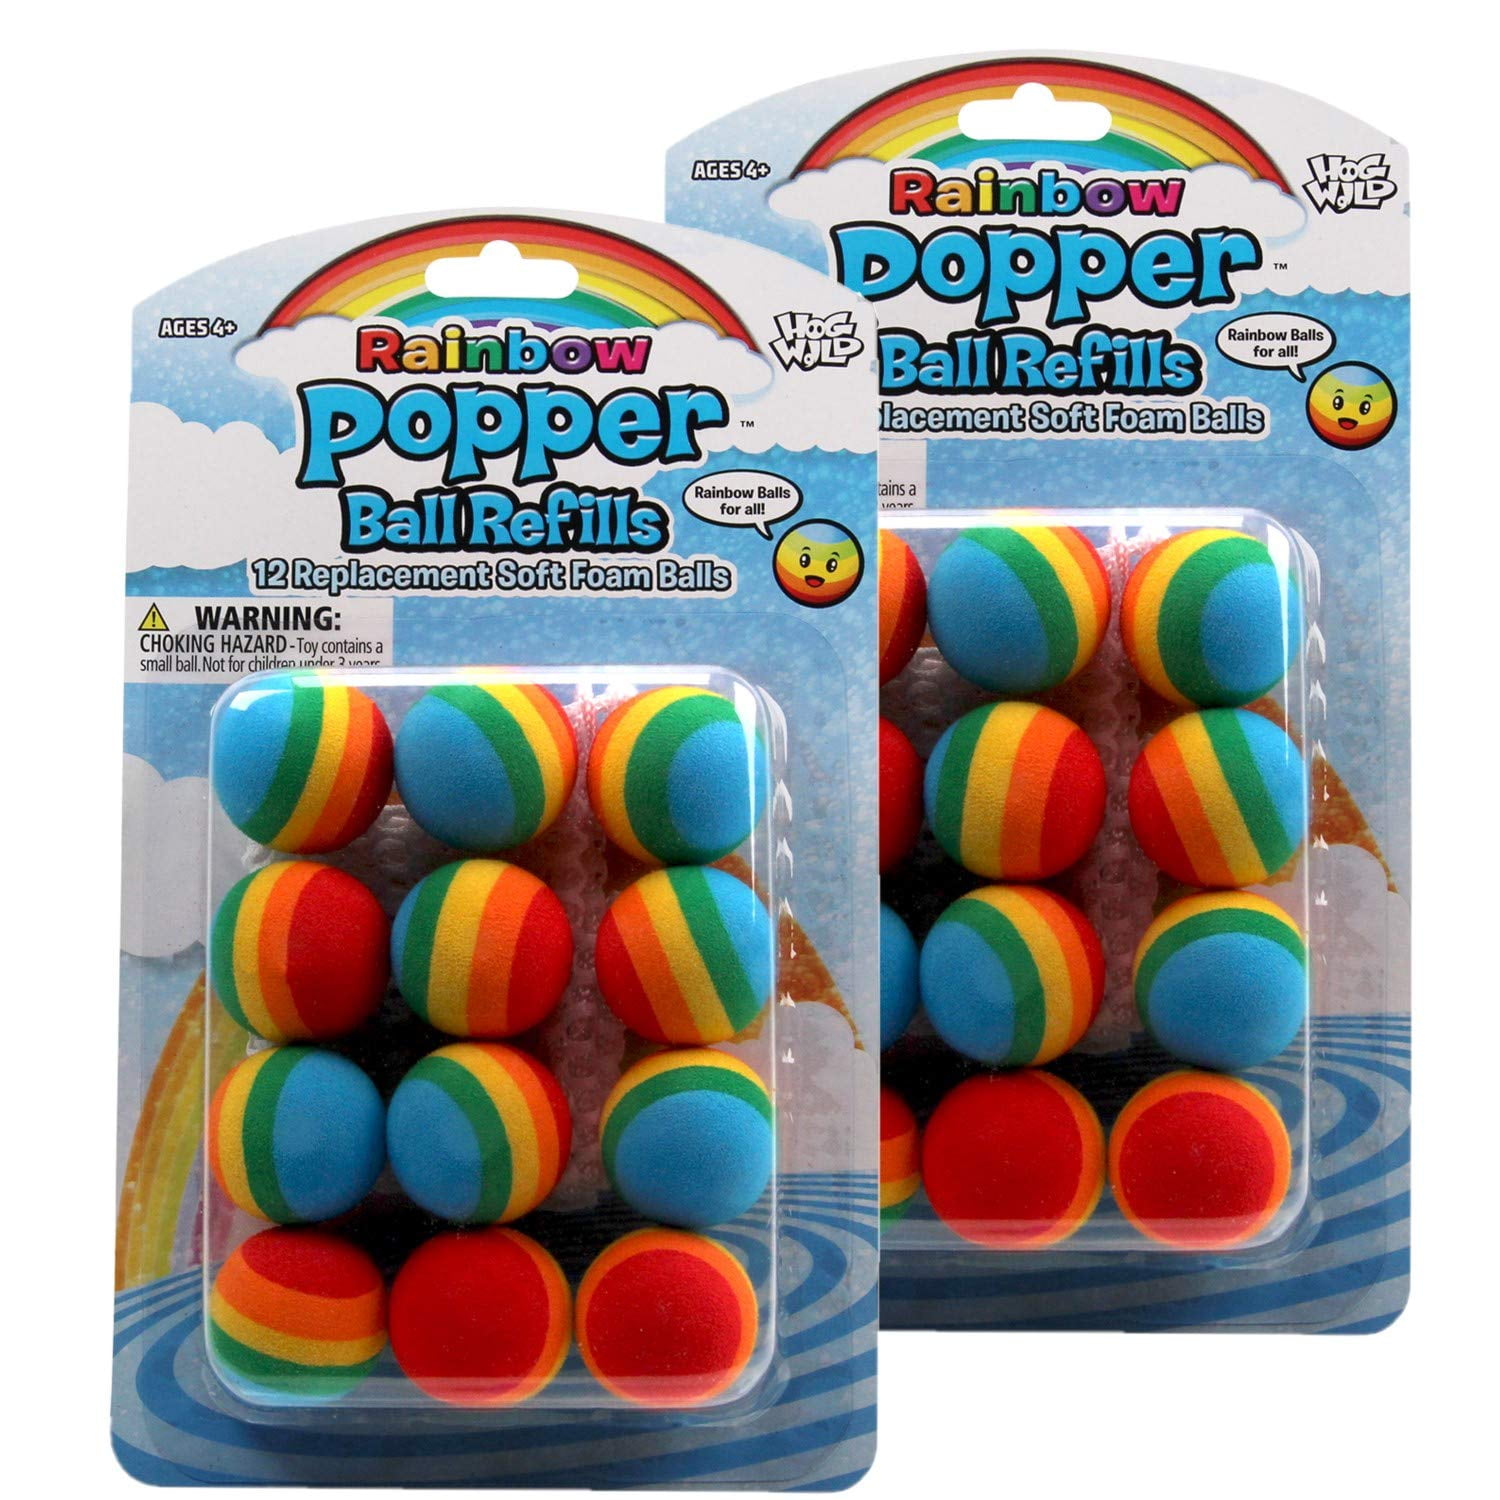 For Poppers and Power Hog Wild Green and Orange Popper Refill Balls 2 Pack 